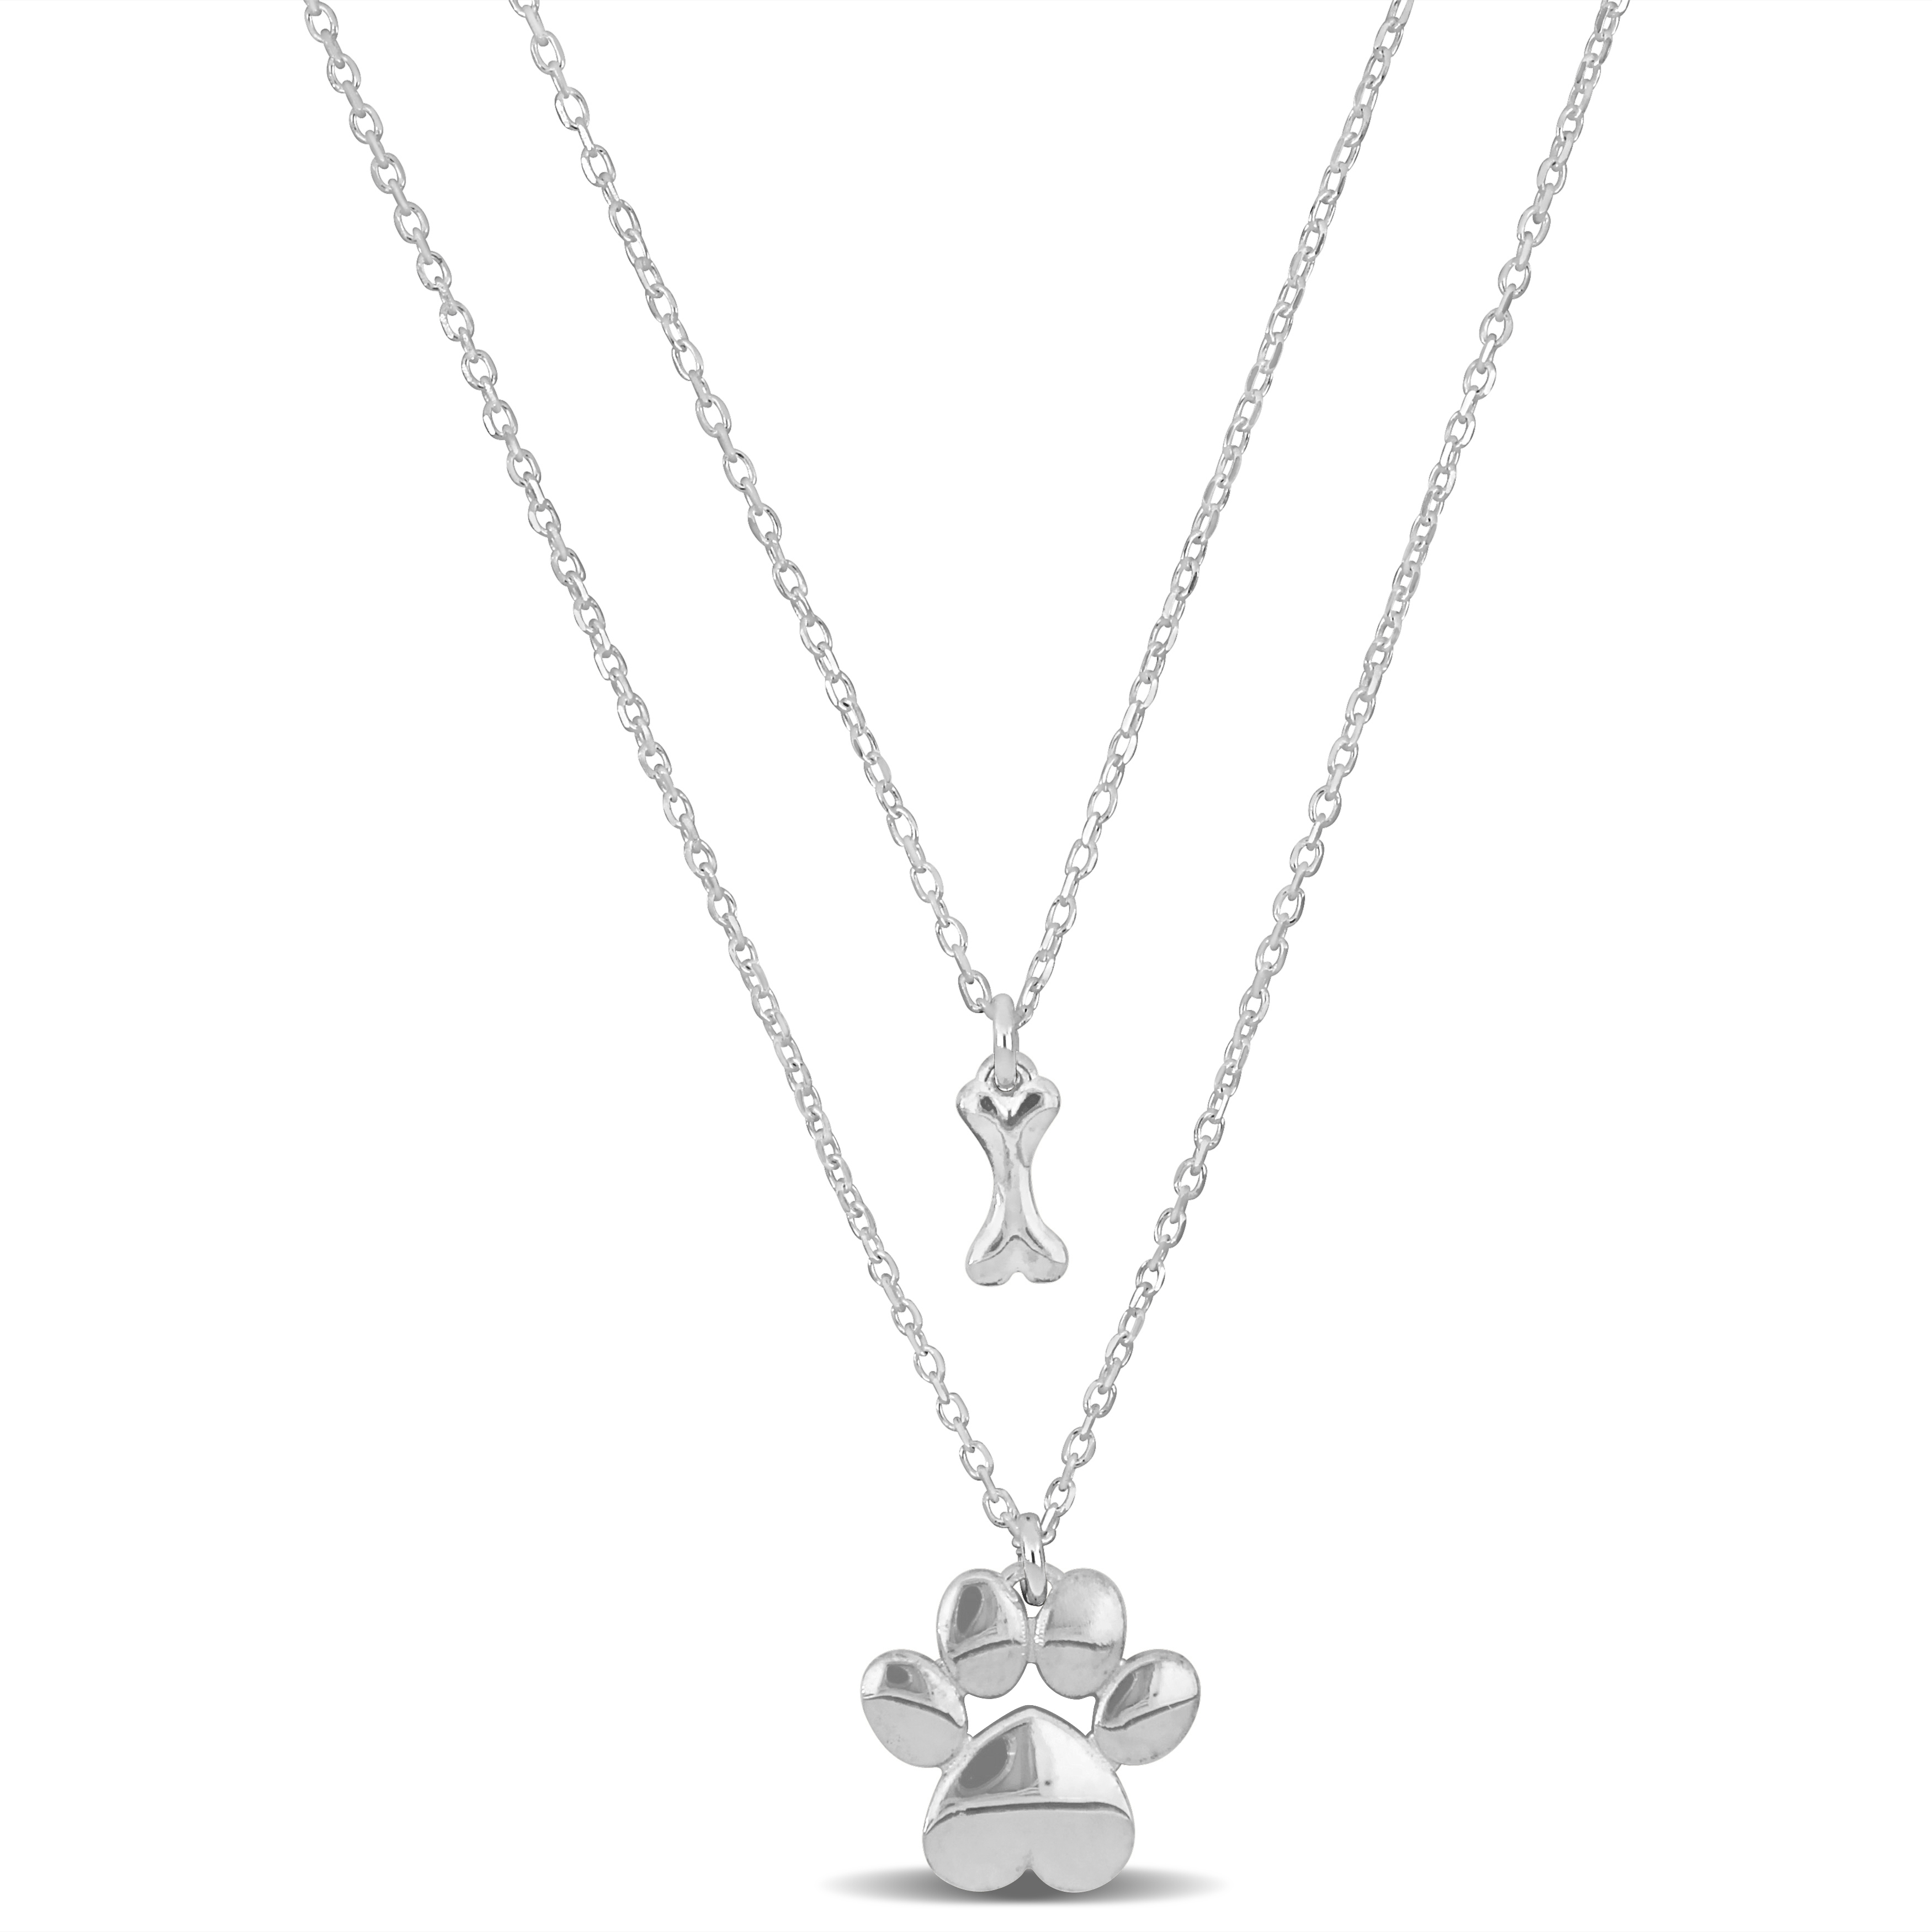 Paw and Bone Charm Double Strand Necklace in Sterling Silver - 16+18+1 in.